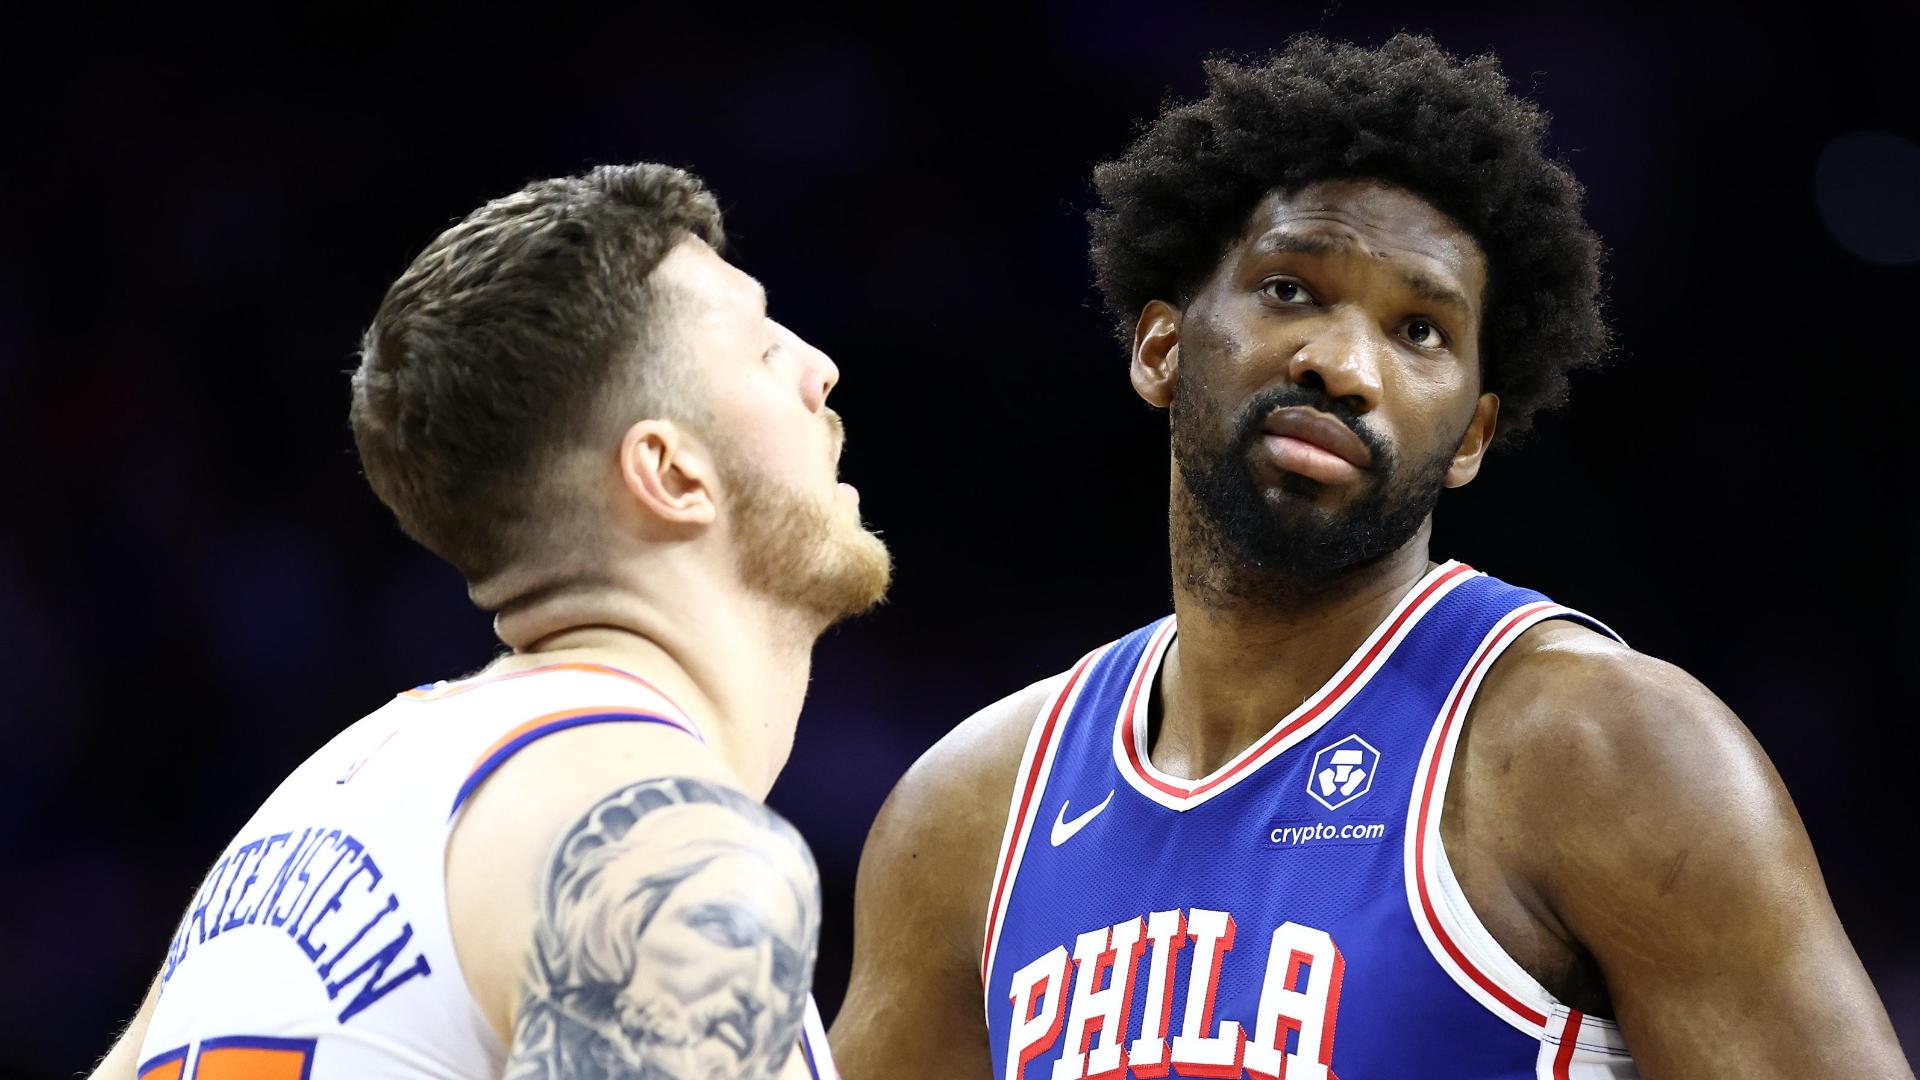 Embiid drops 50 points to set playoff career high in 76ers win